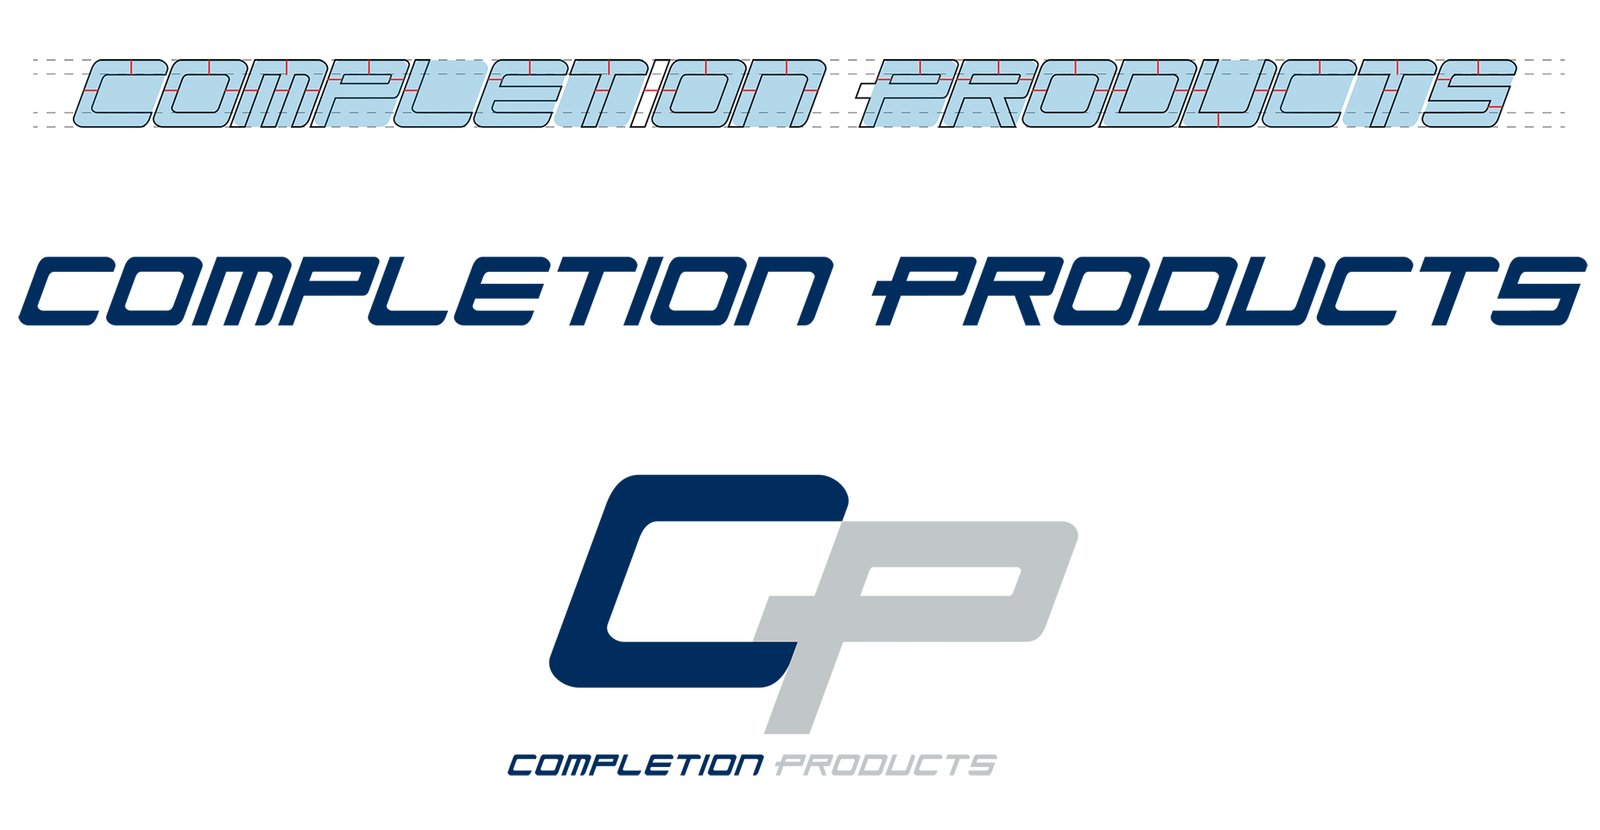 Completion products singapore custom font